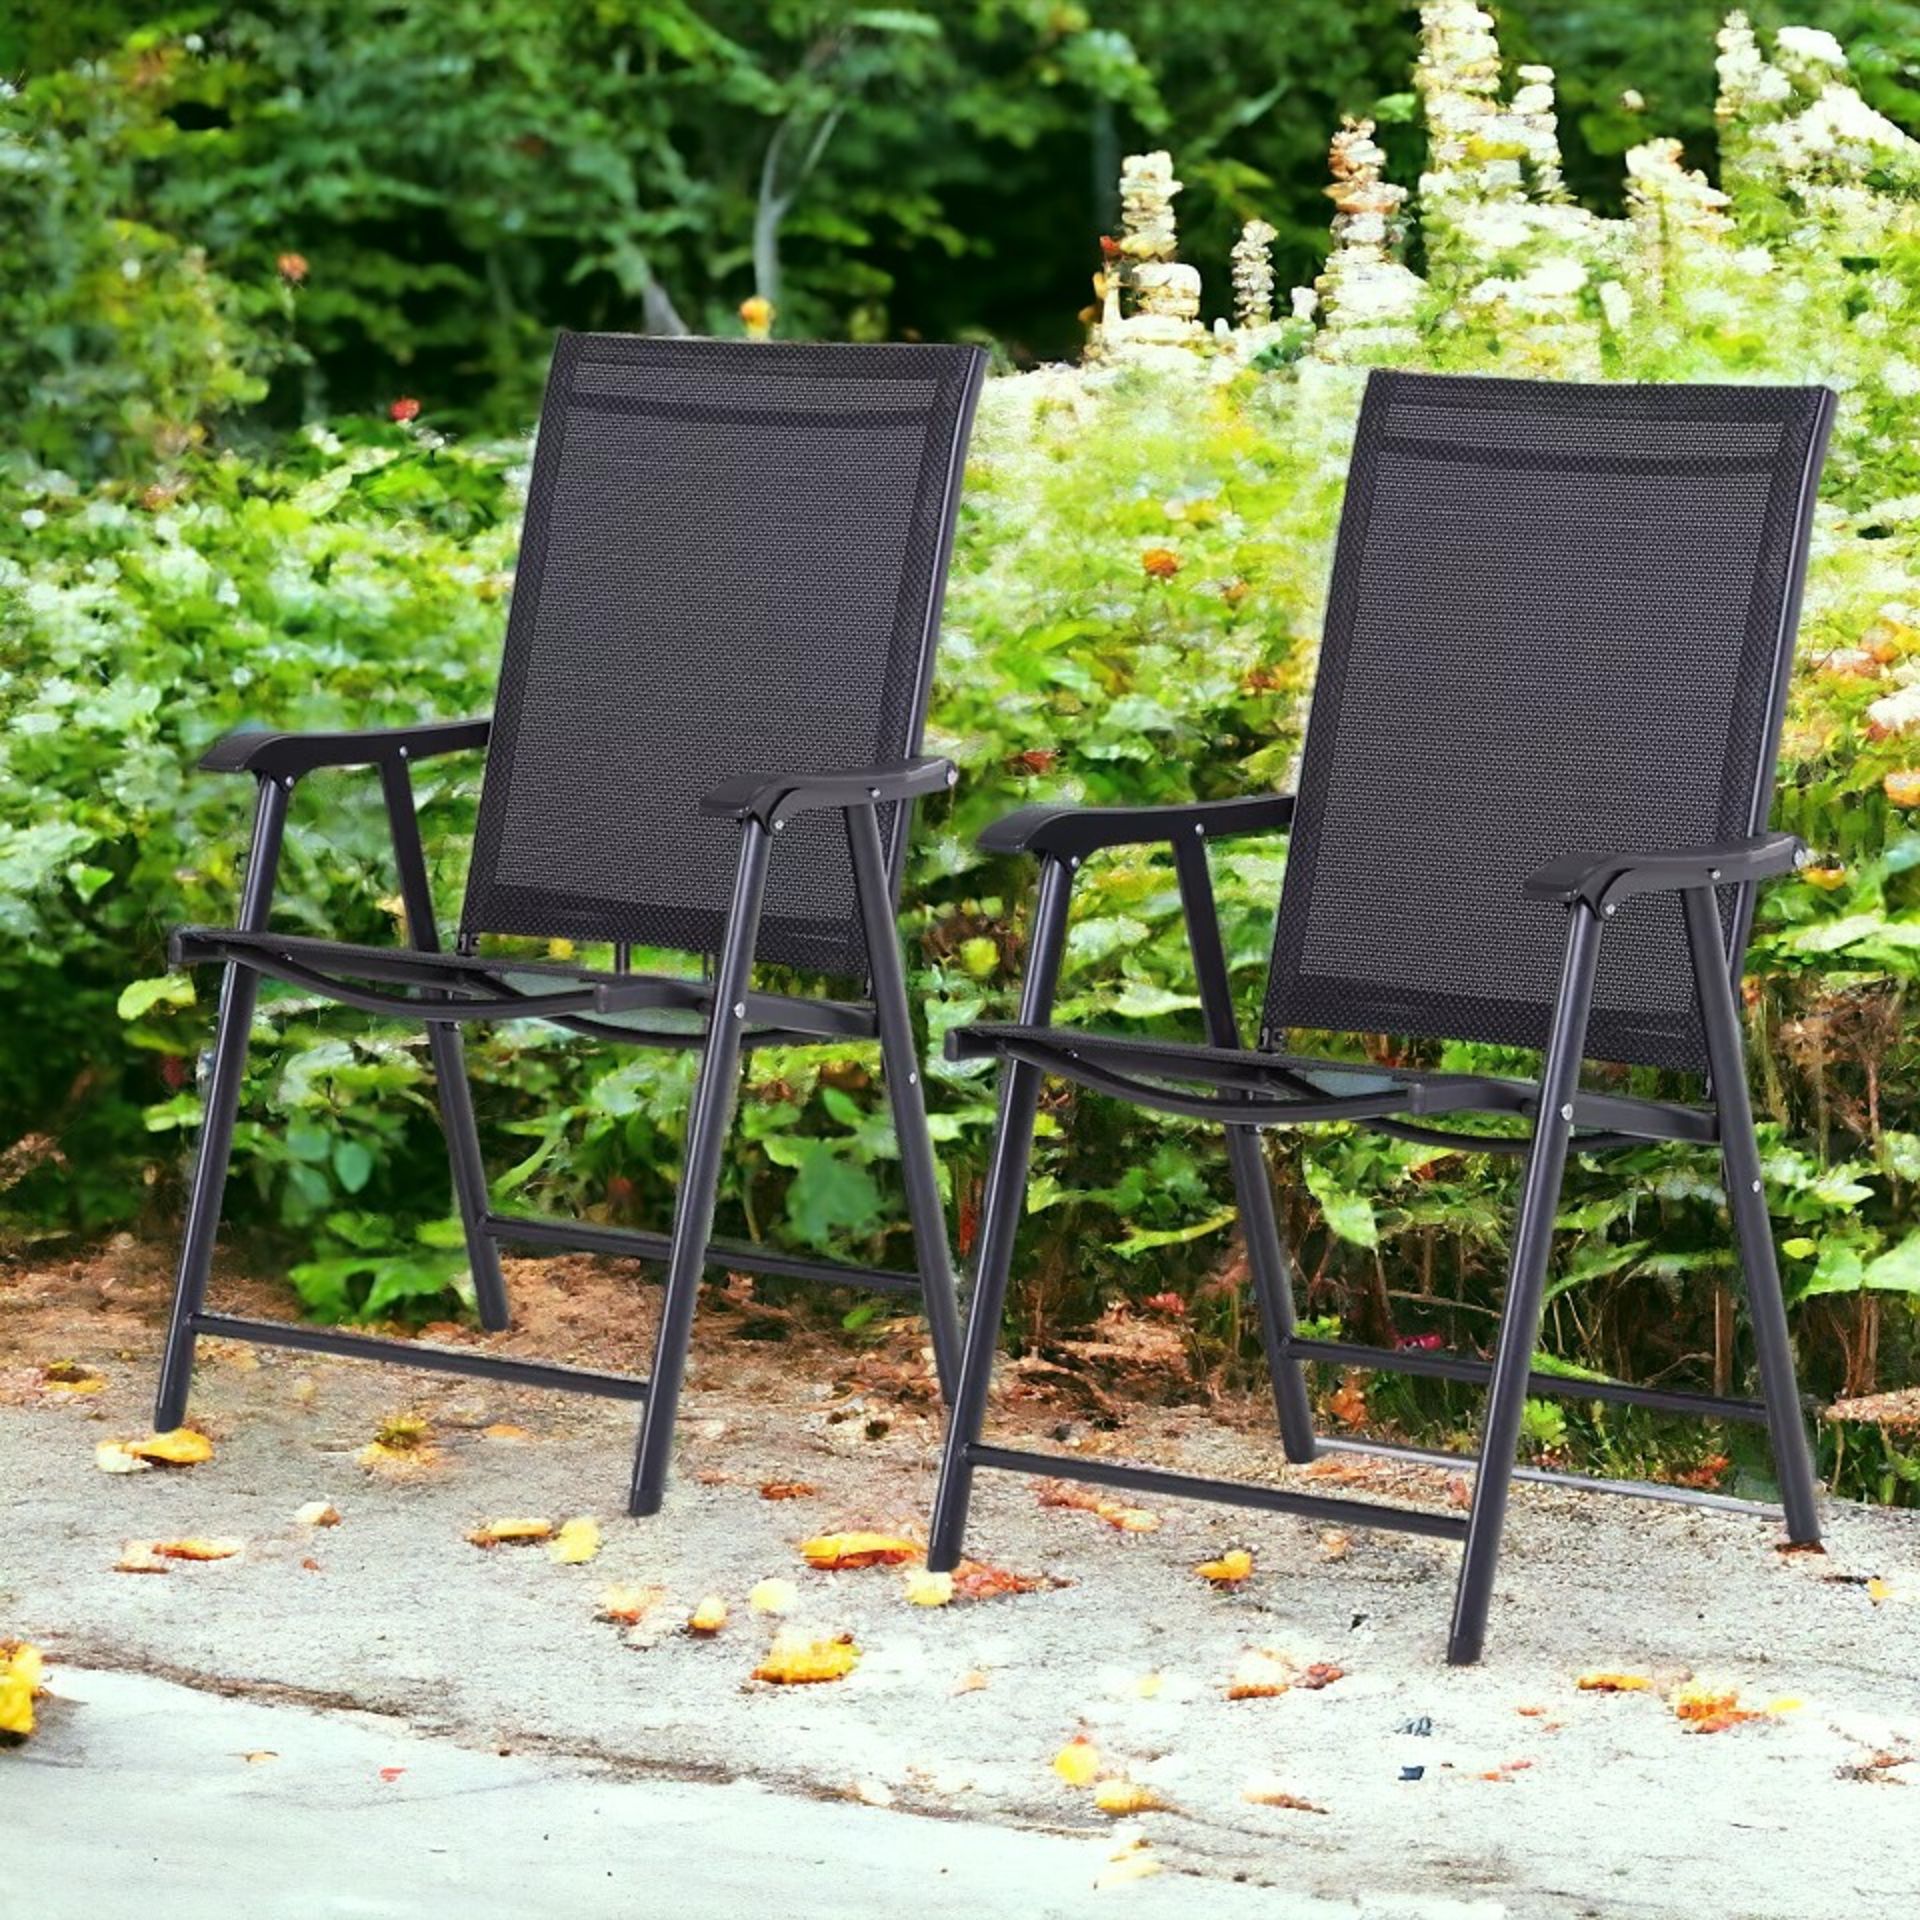 FREE DELIVERY - BRAND NEW 2-PCS GARDEN ARMCHAIRS OUTDOOR PATIO FOLDING MODERN FURNITURE BLACK